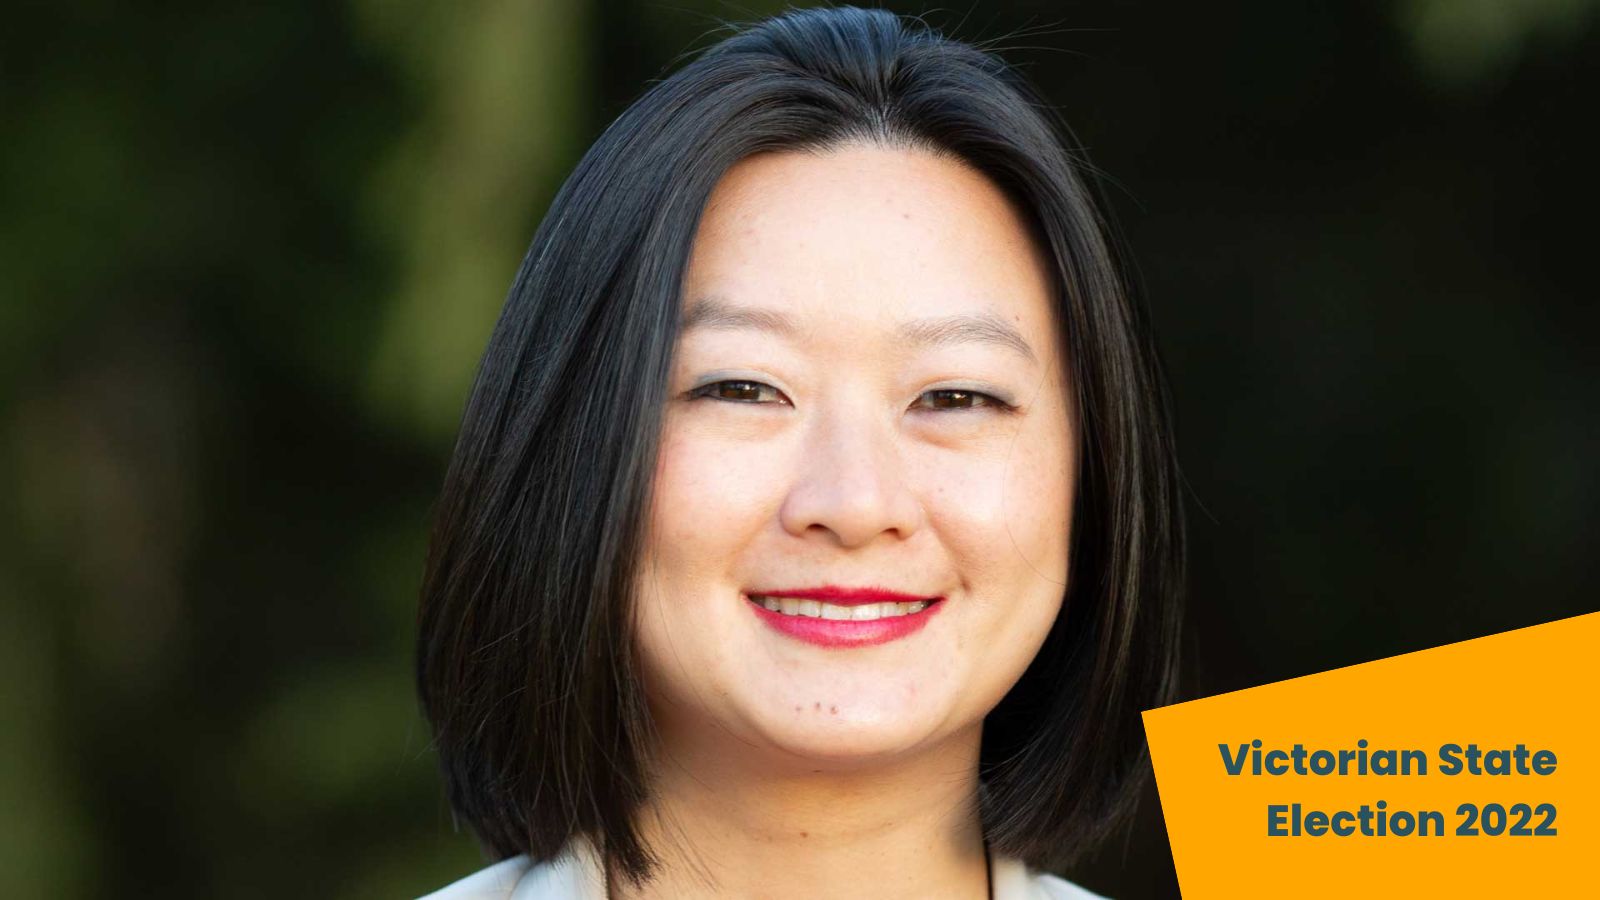 Photo of Wesa Chau smiling, overlaid text reads "Victorian State election 2022"